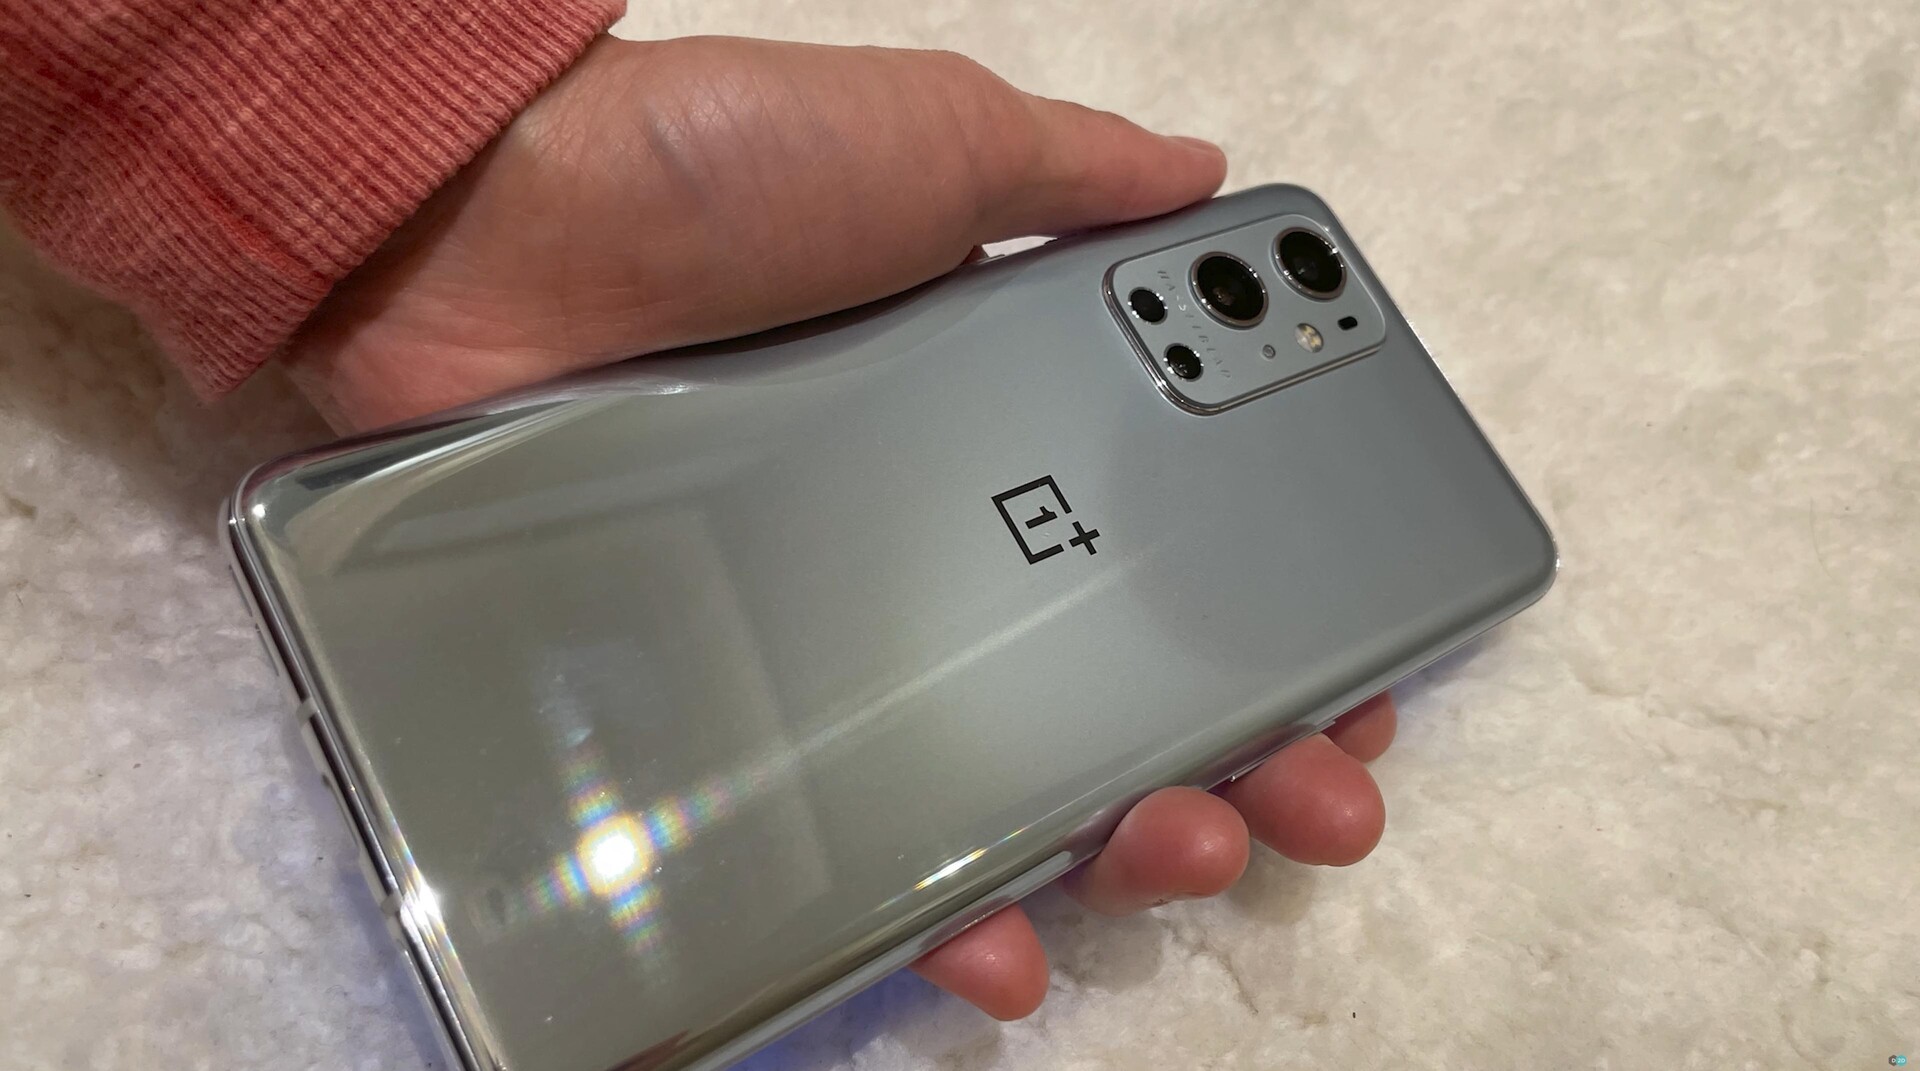 OnePlus 9 Pro leaks again with 4K and 120 FPS video recording capabilities and upgraded camera hardware; OnePlus 9 series launch teasers to begin very soon - Notebookcheck.net